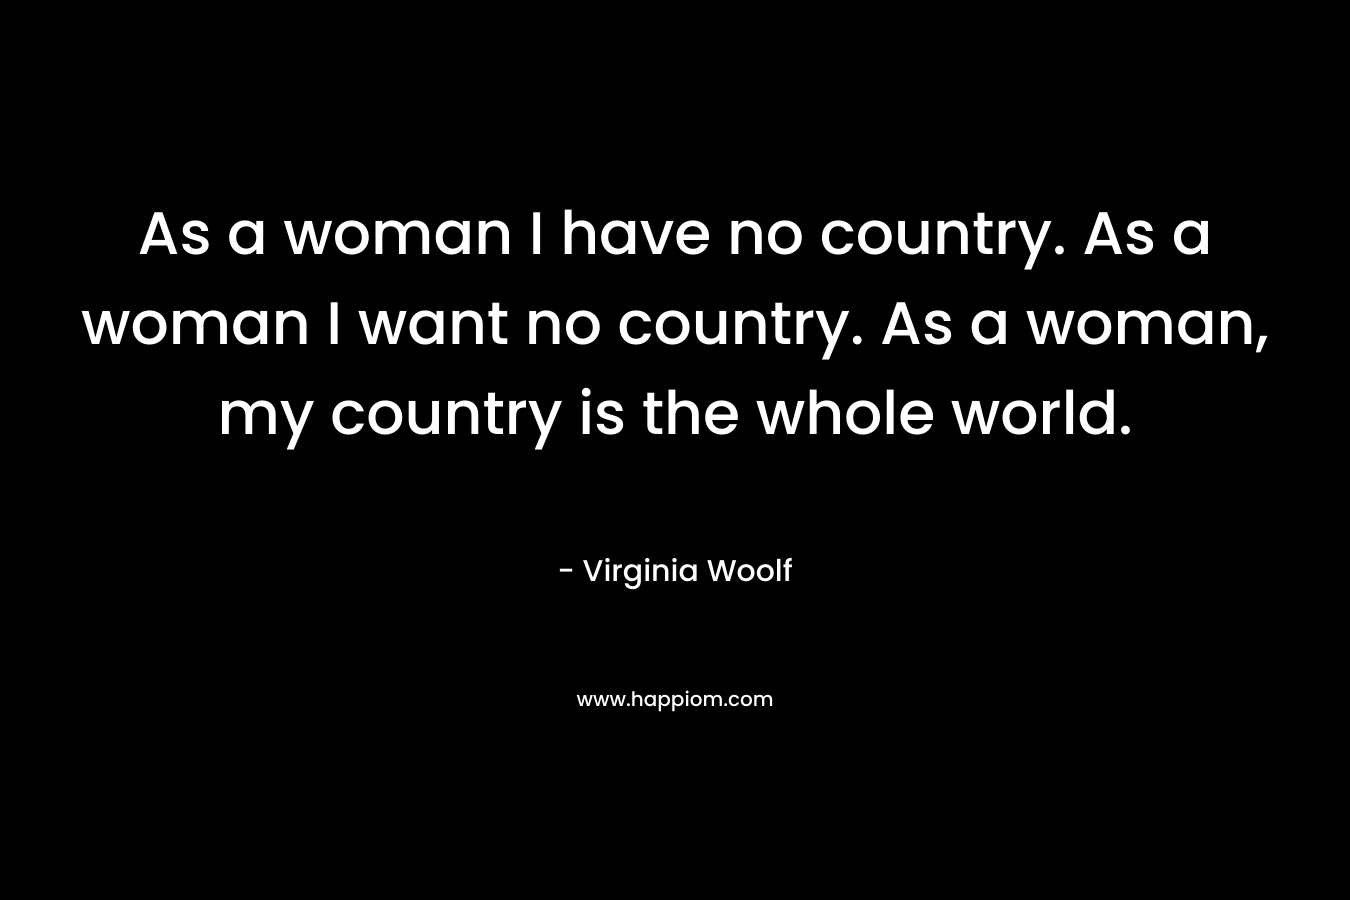 As a woman I have no country. As a woman I want no country. As a woman, my country is the whole world.